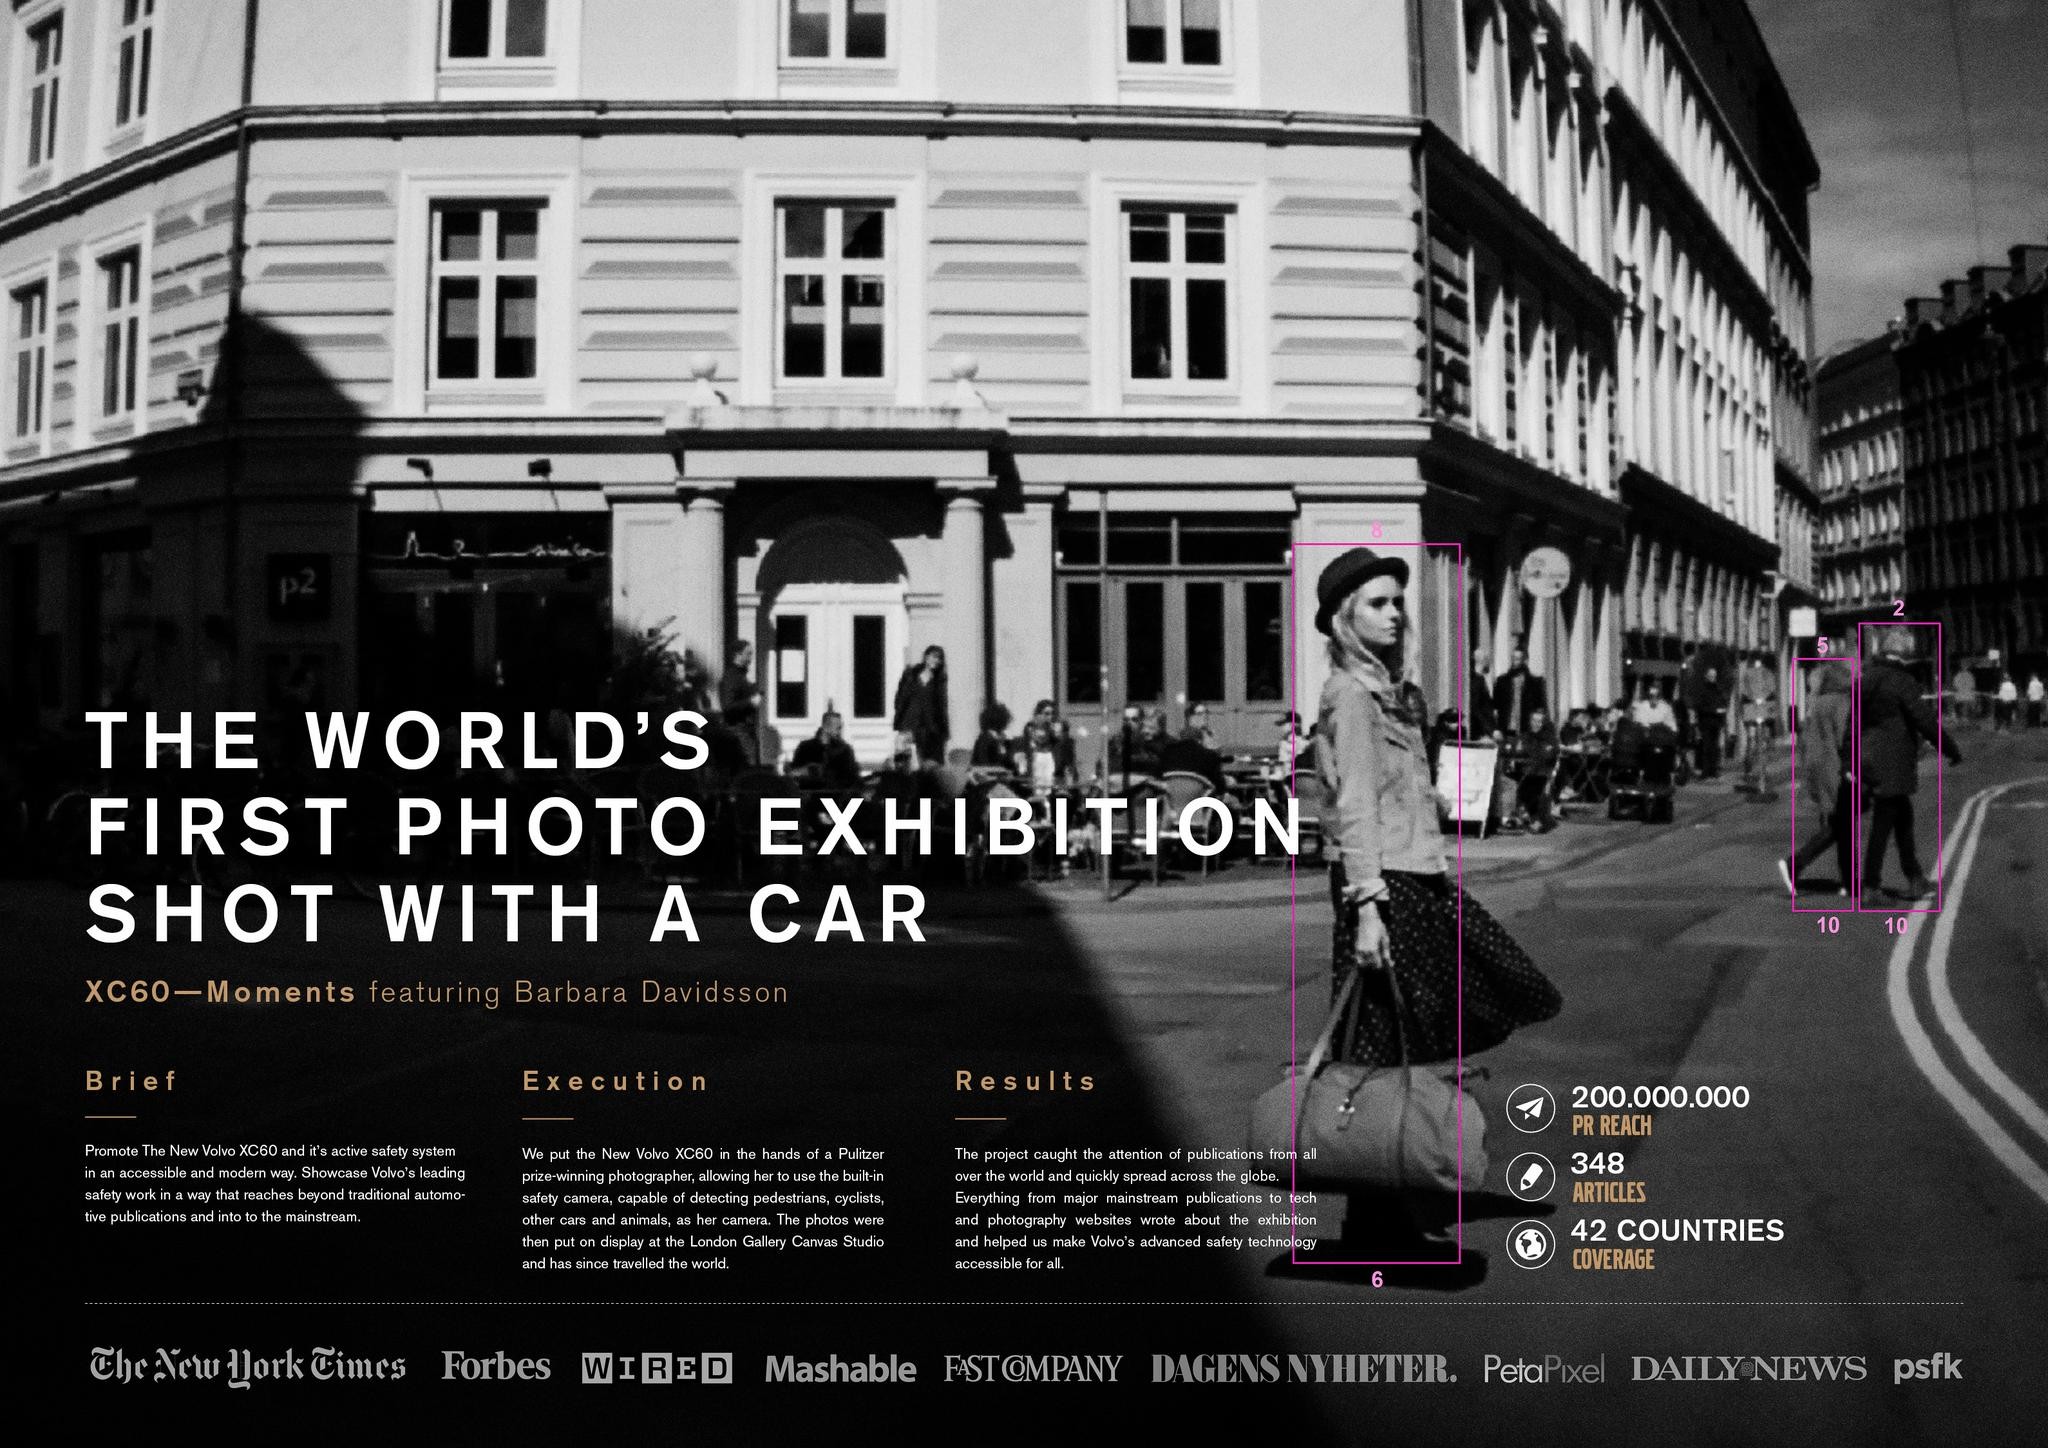 The world's first photo exhibition shot with a car